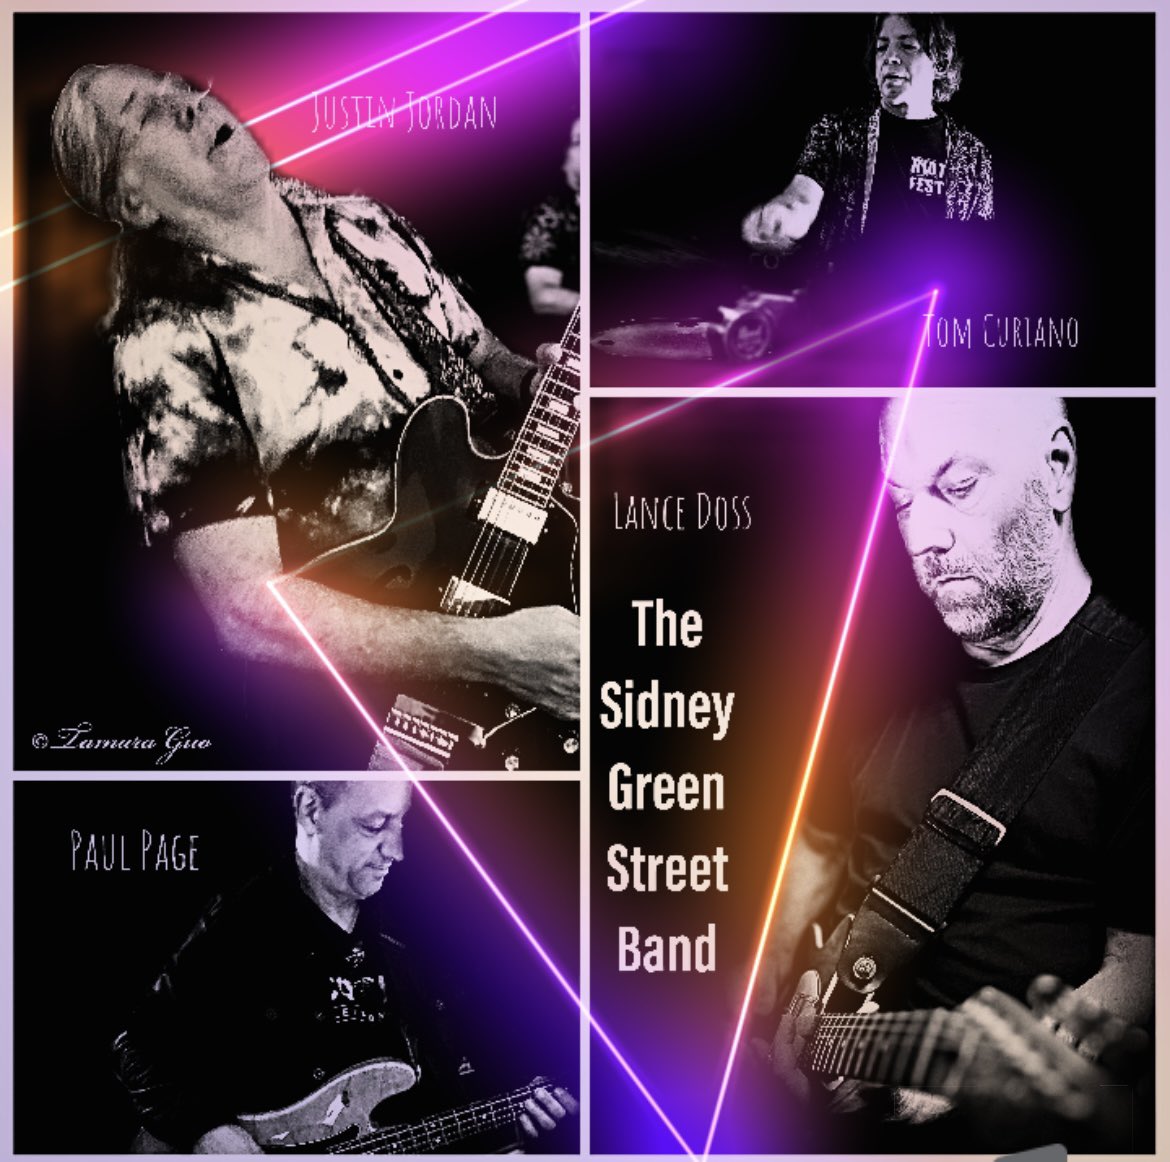 Next weekend when you’re sick of turkey & football, get on out to The  Great Notch Inn Little Falls, NJ for The Sidney Green Street Band Sunday November 26, 8pm-12am. No cover! #nj #njmusic #sidneygreenstreetband #northjersey #livemusic #thanksgivingweekend @PaulAndrewPage